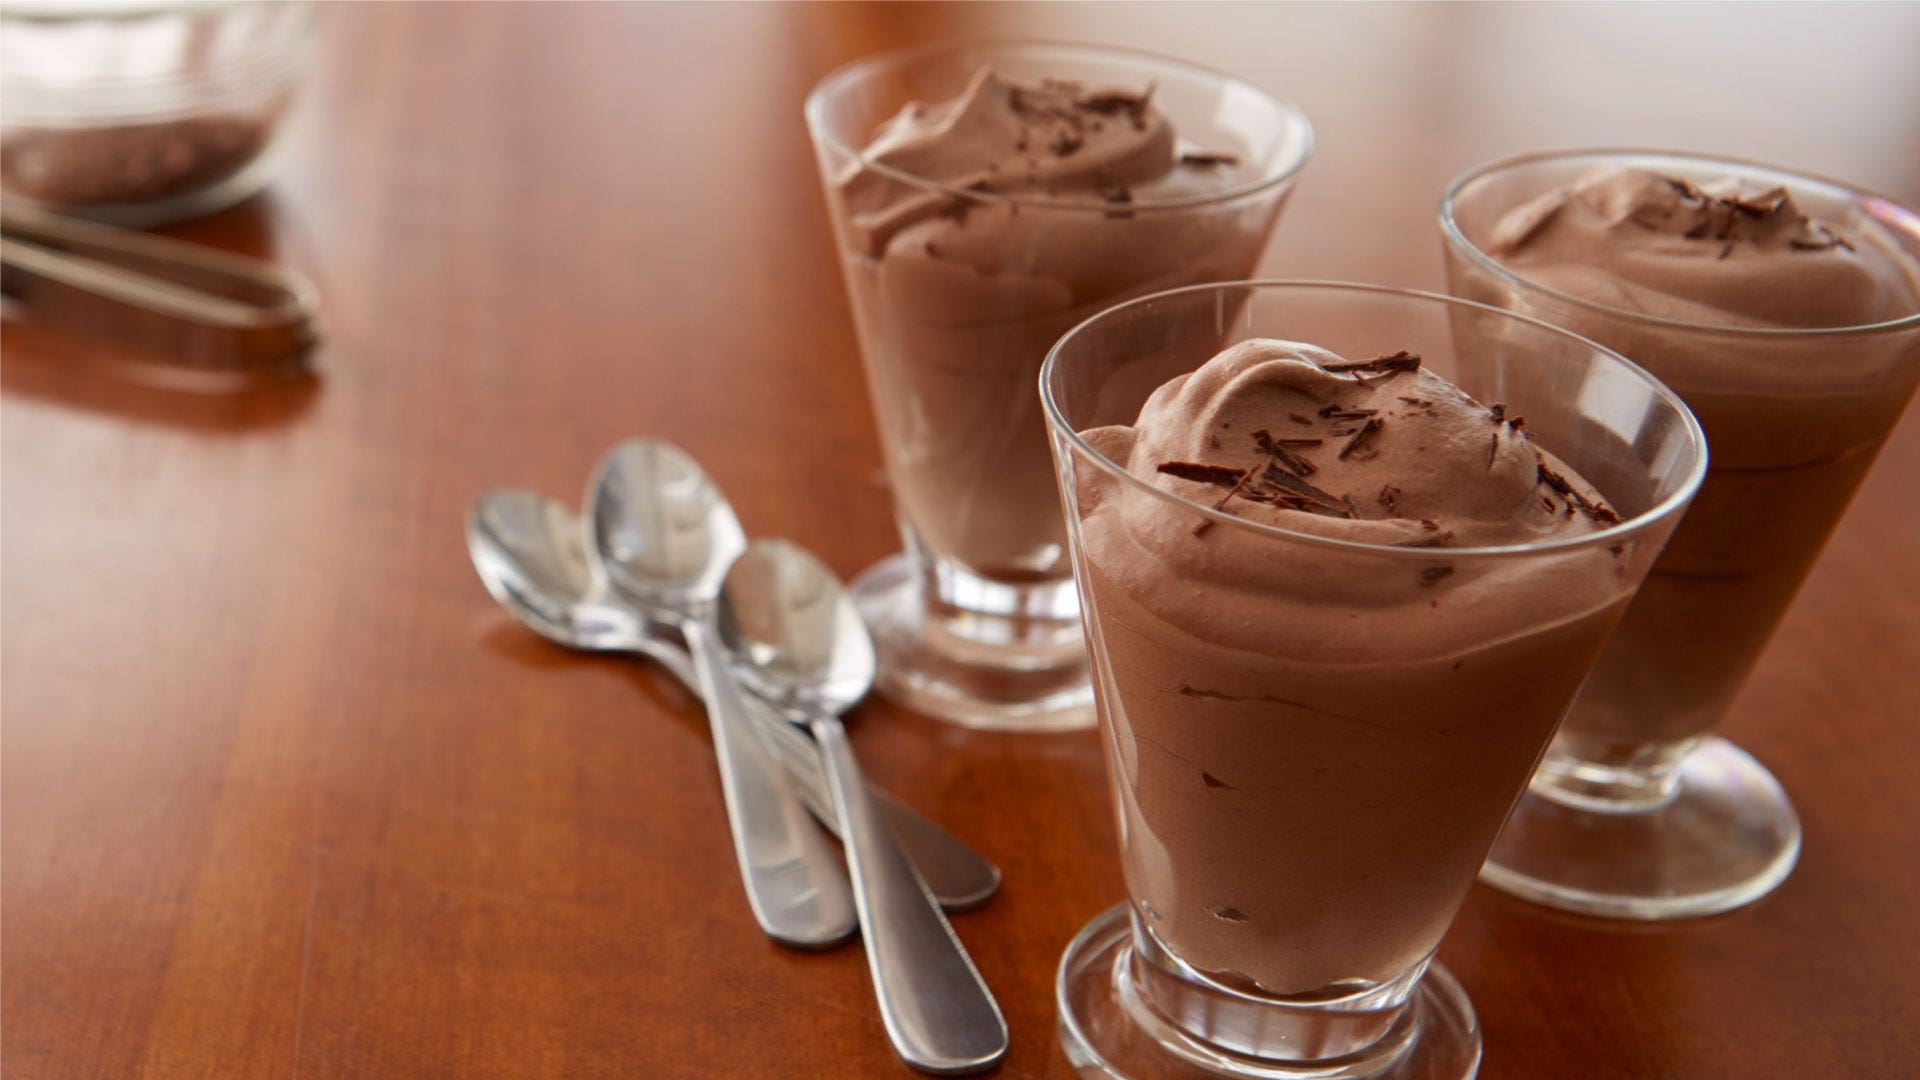 Classic Chocolate Mousse